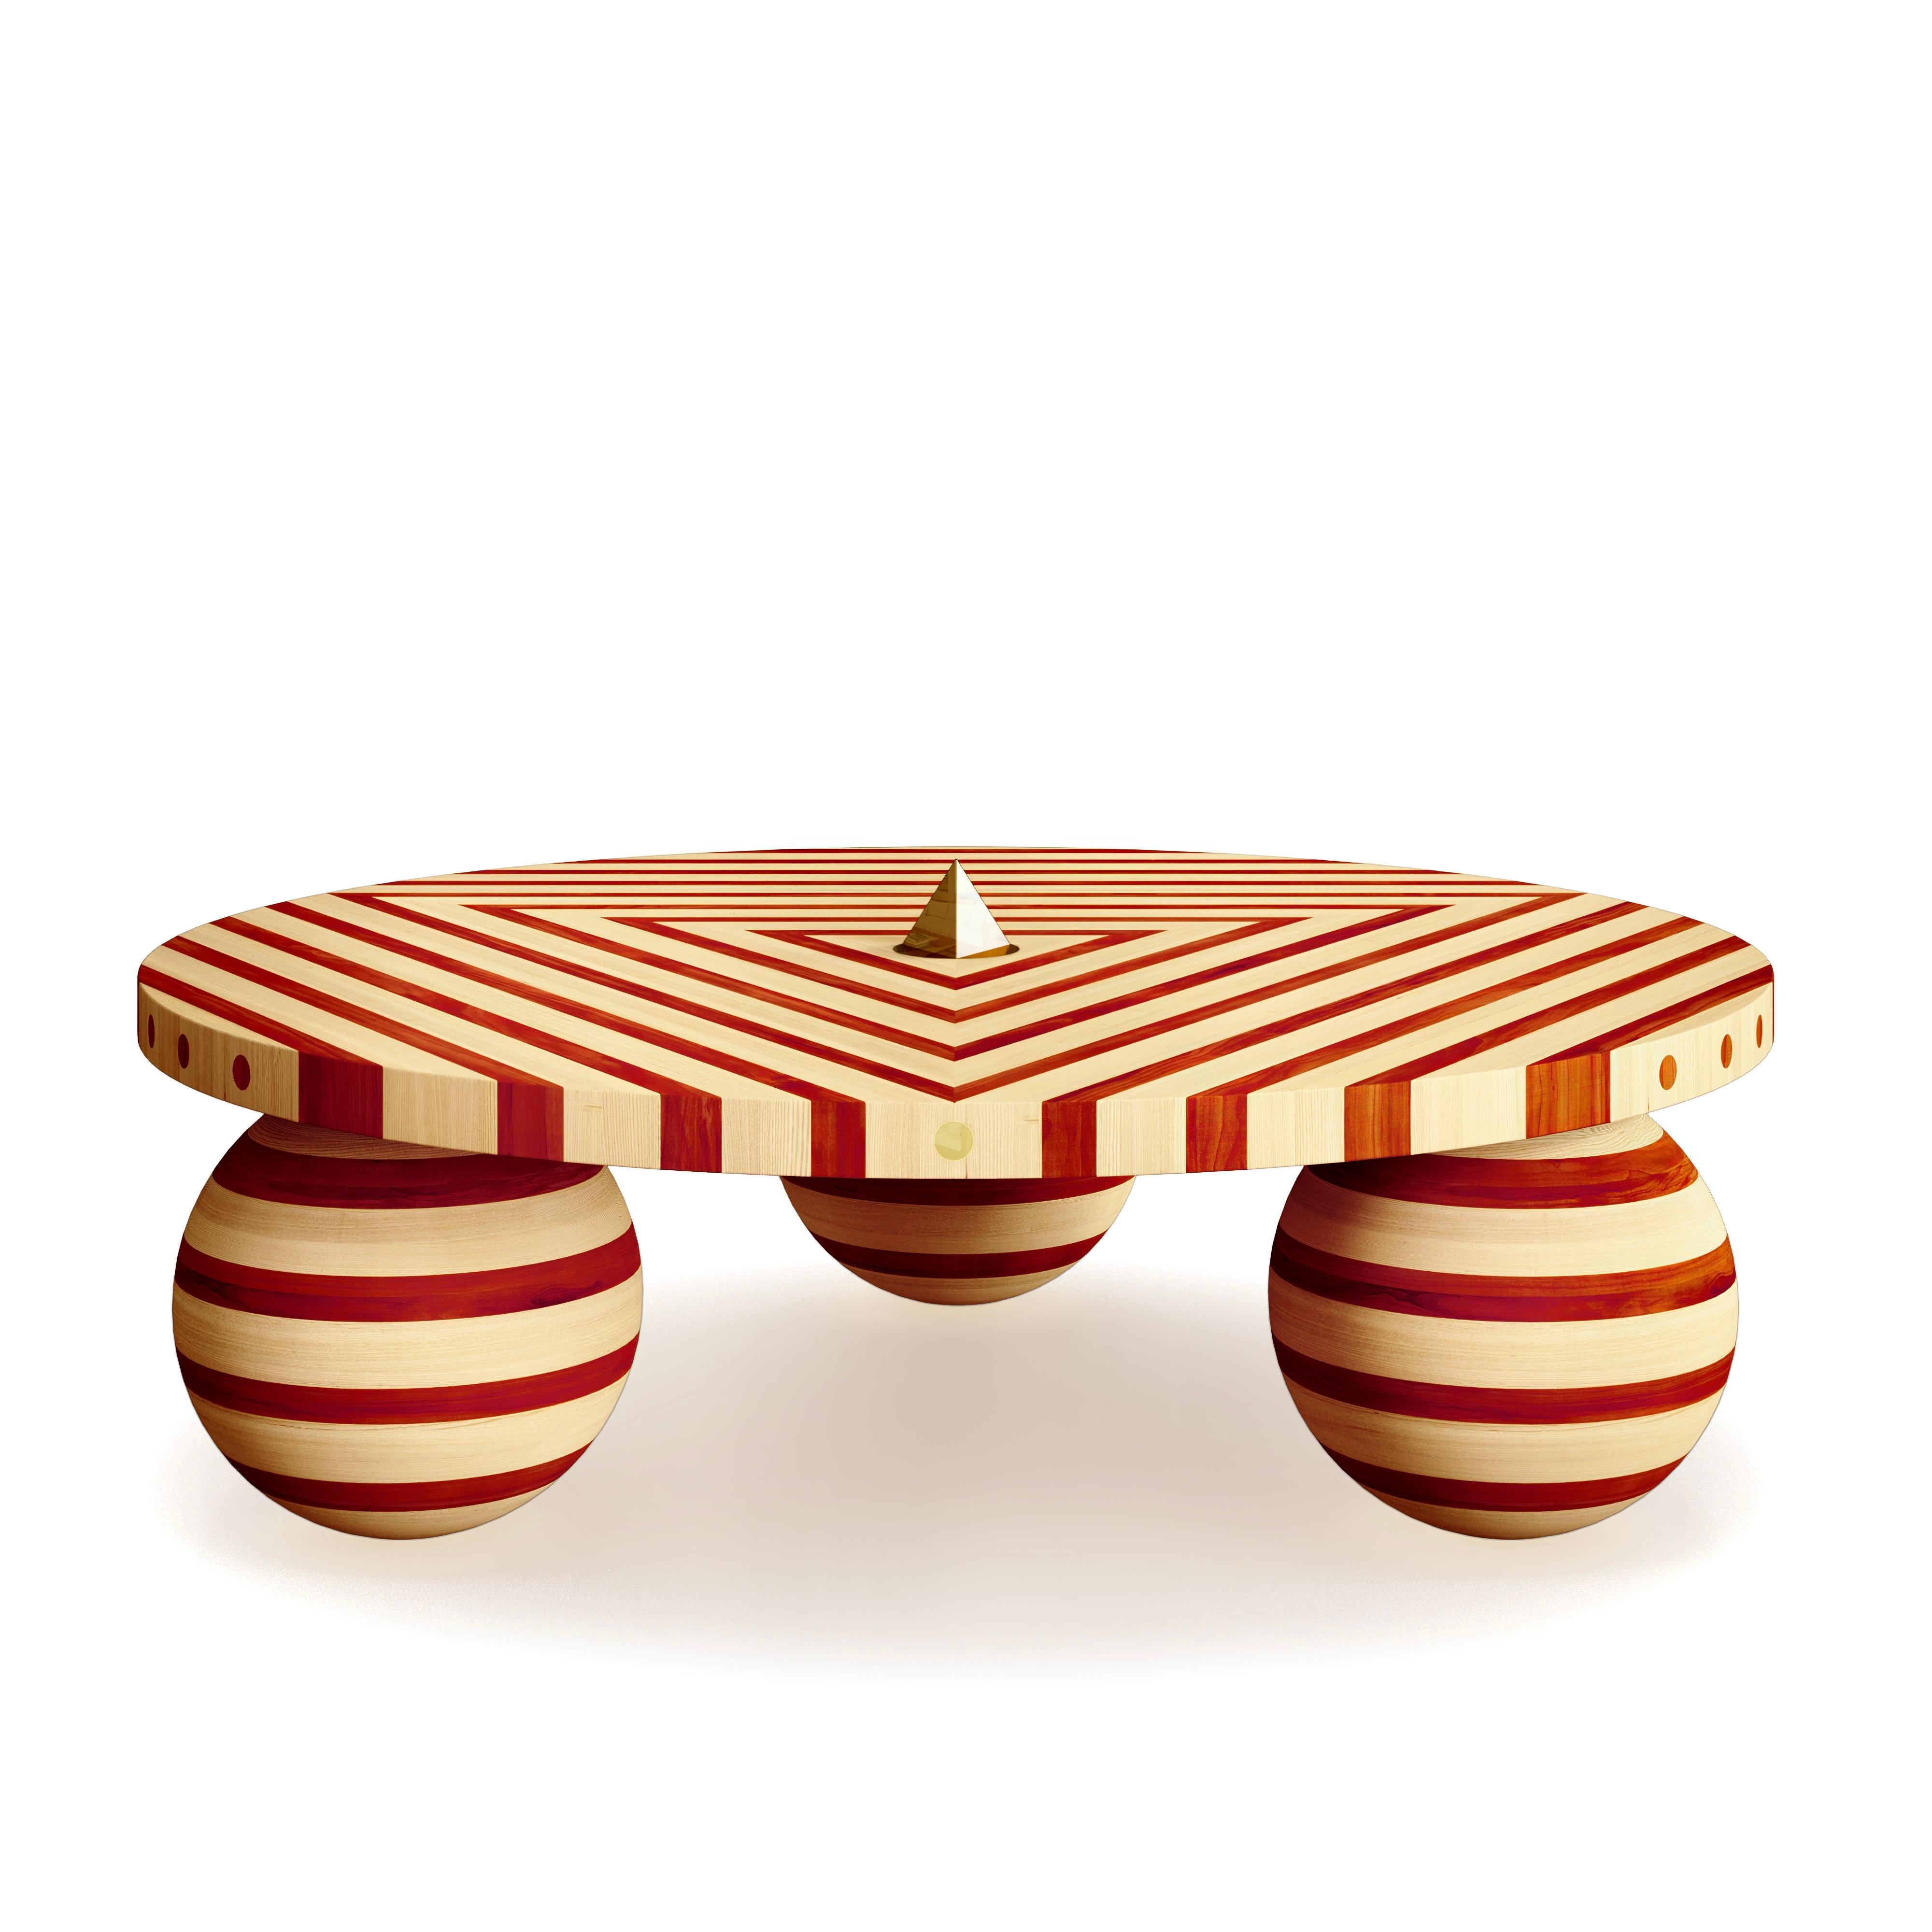 This stunning coffee table is part of the Striped series by Troy Smith Studio.

This coffee table is totally unique and original and 100% crafted by hand out of solid Maple wood from North America and Padauk sourced from Africa. The center of the